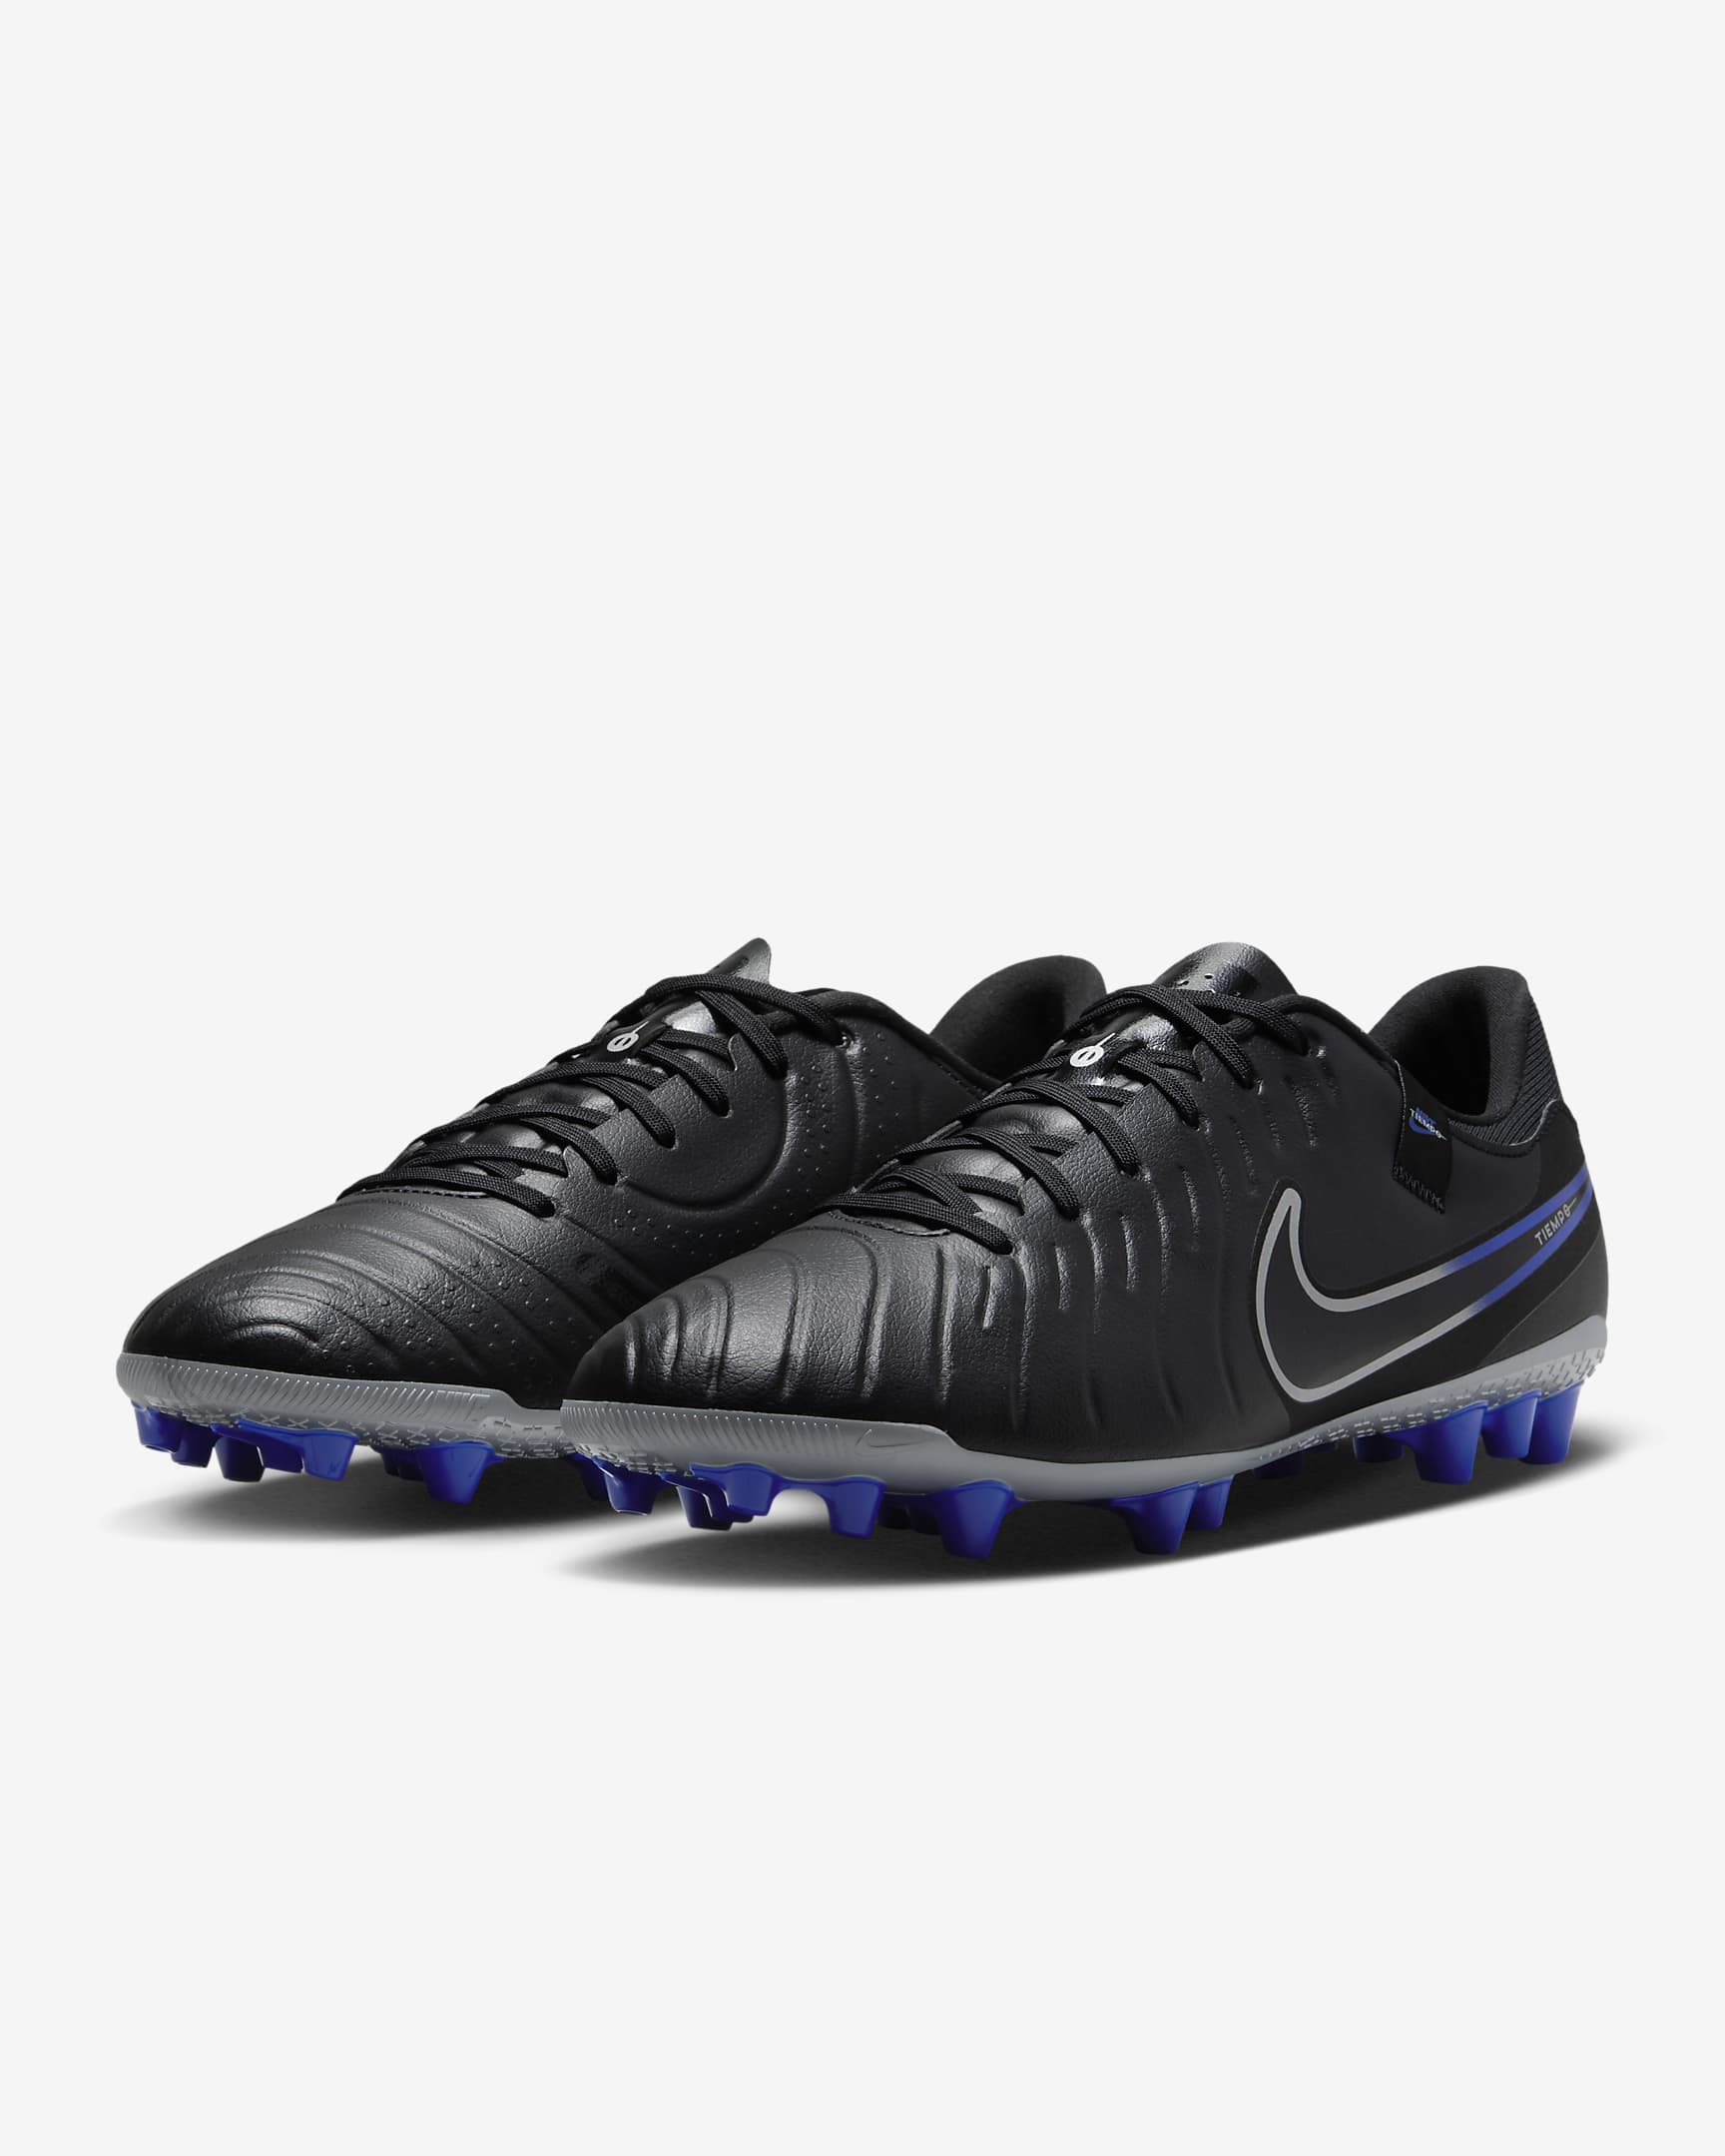 Nike Tiempo Legend 10 Academy Artificial-Grass Low-Top Soccer Cleats ...